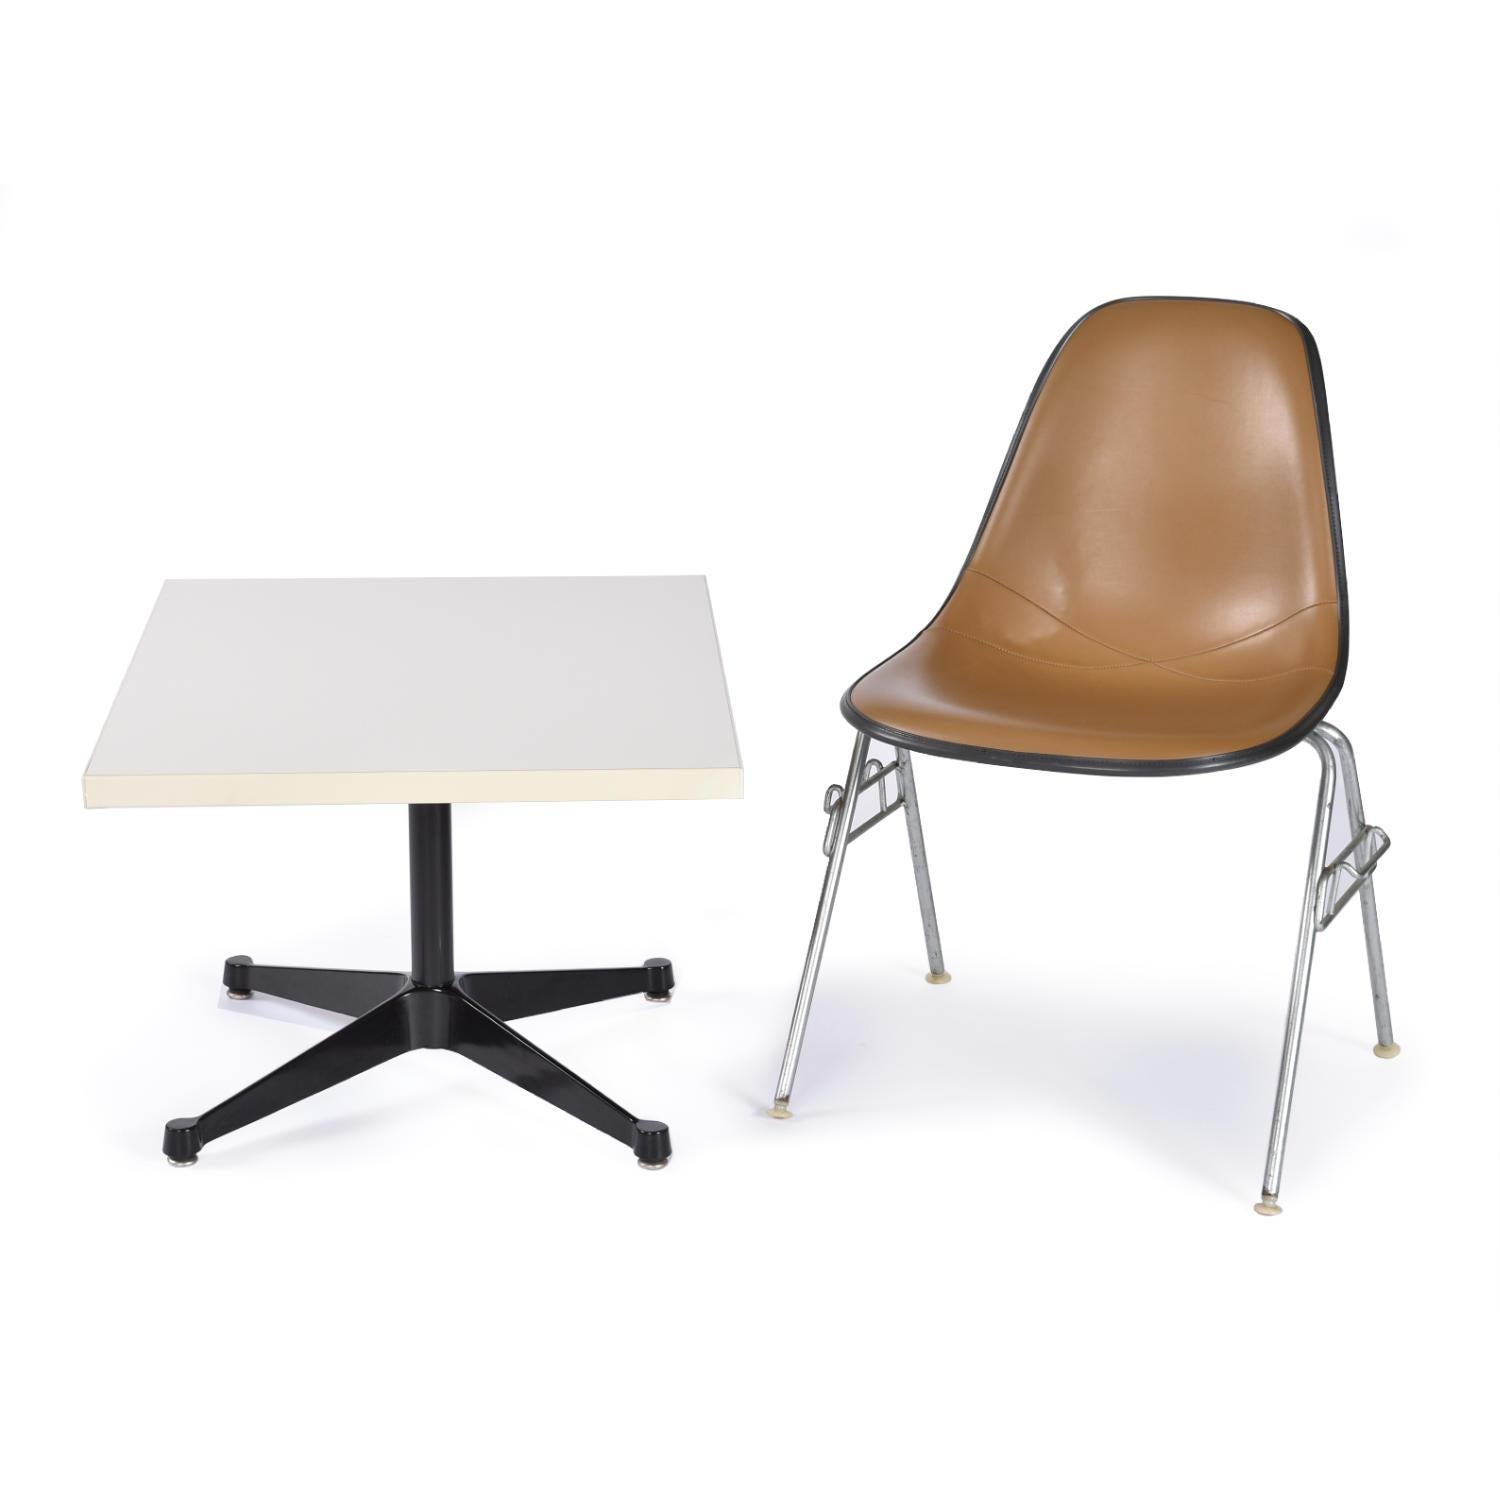 American Vintage Charles Eames for Herman Miller Rectangular White and Black Side Table For Sale